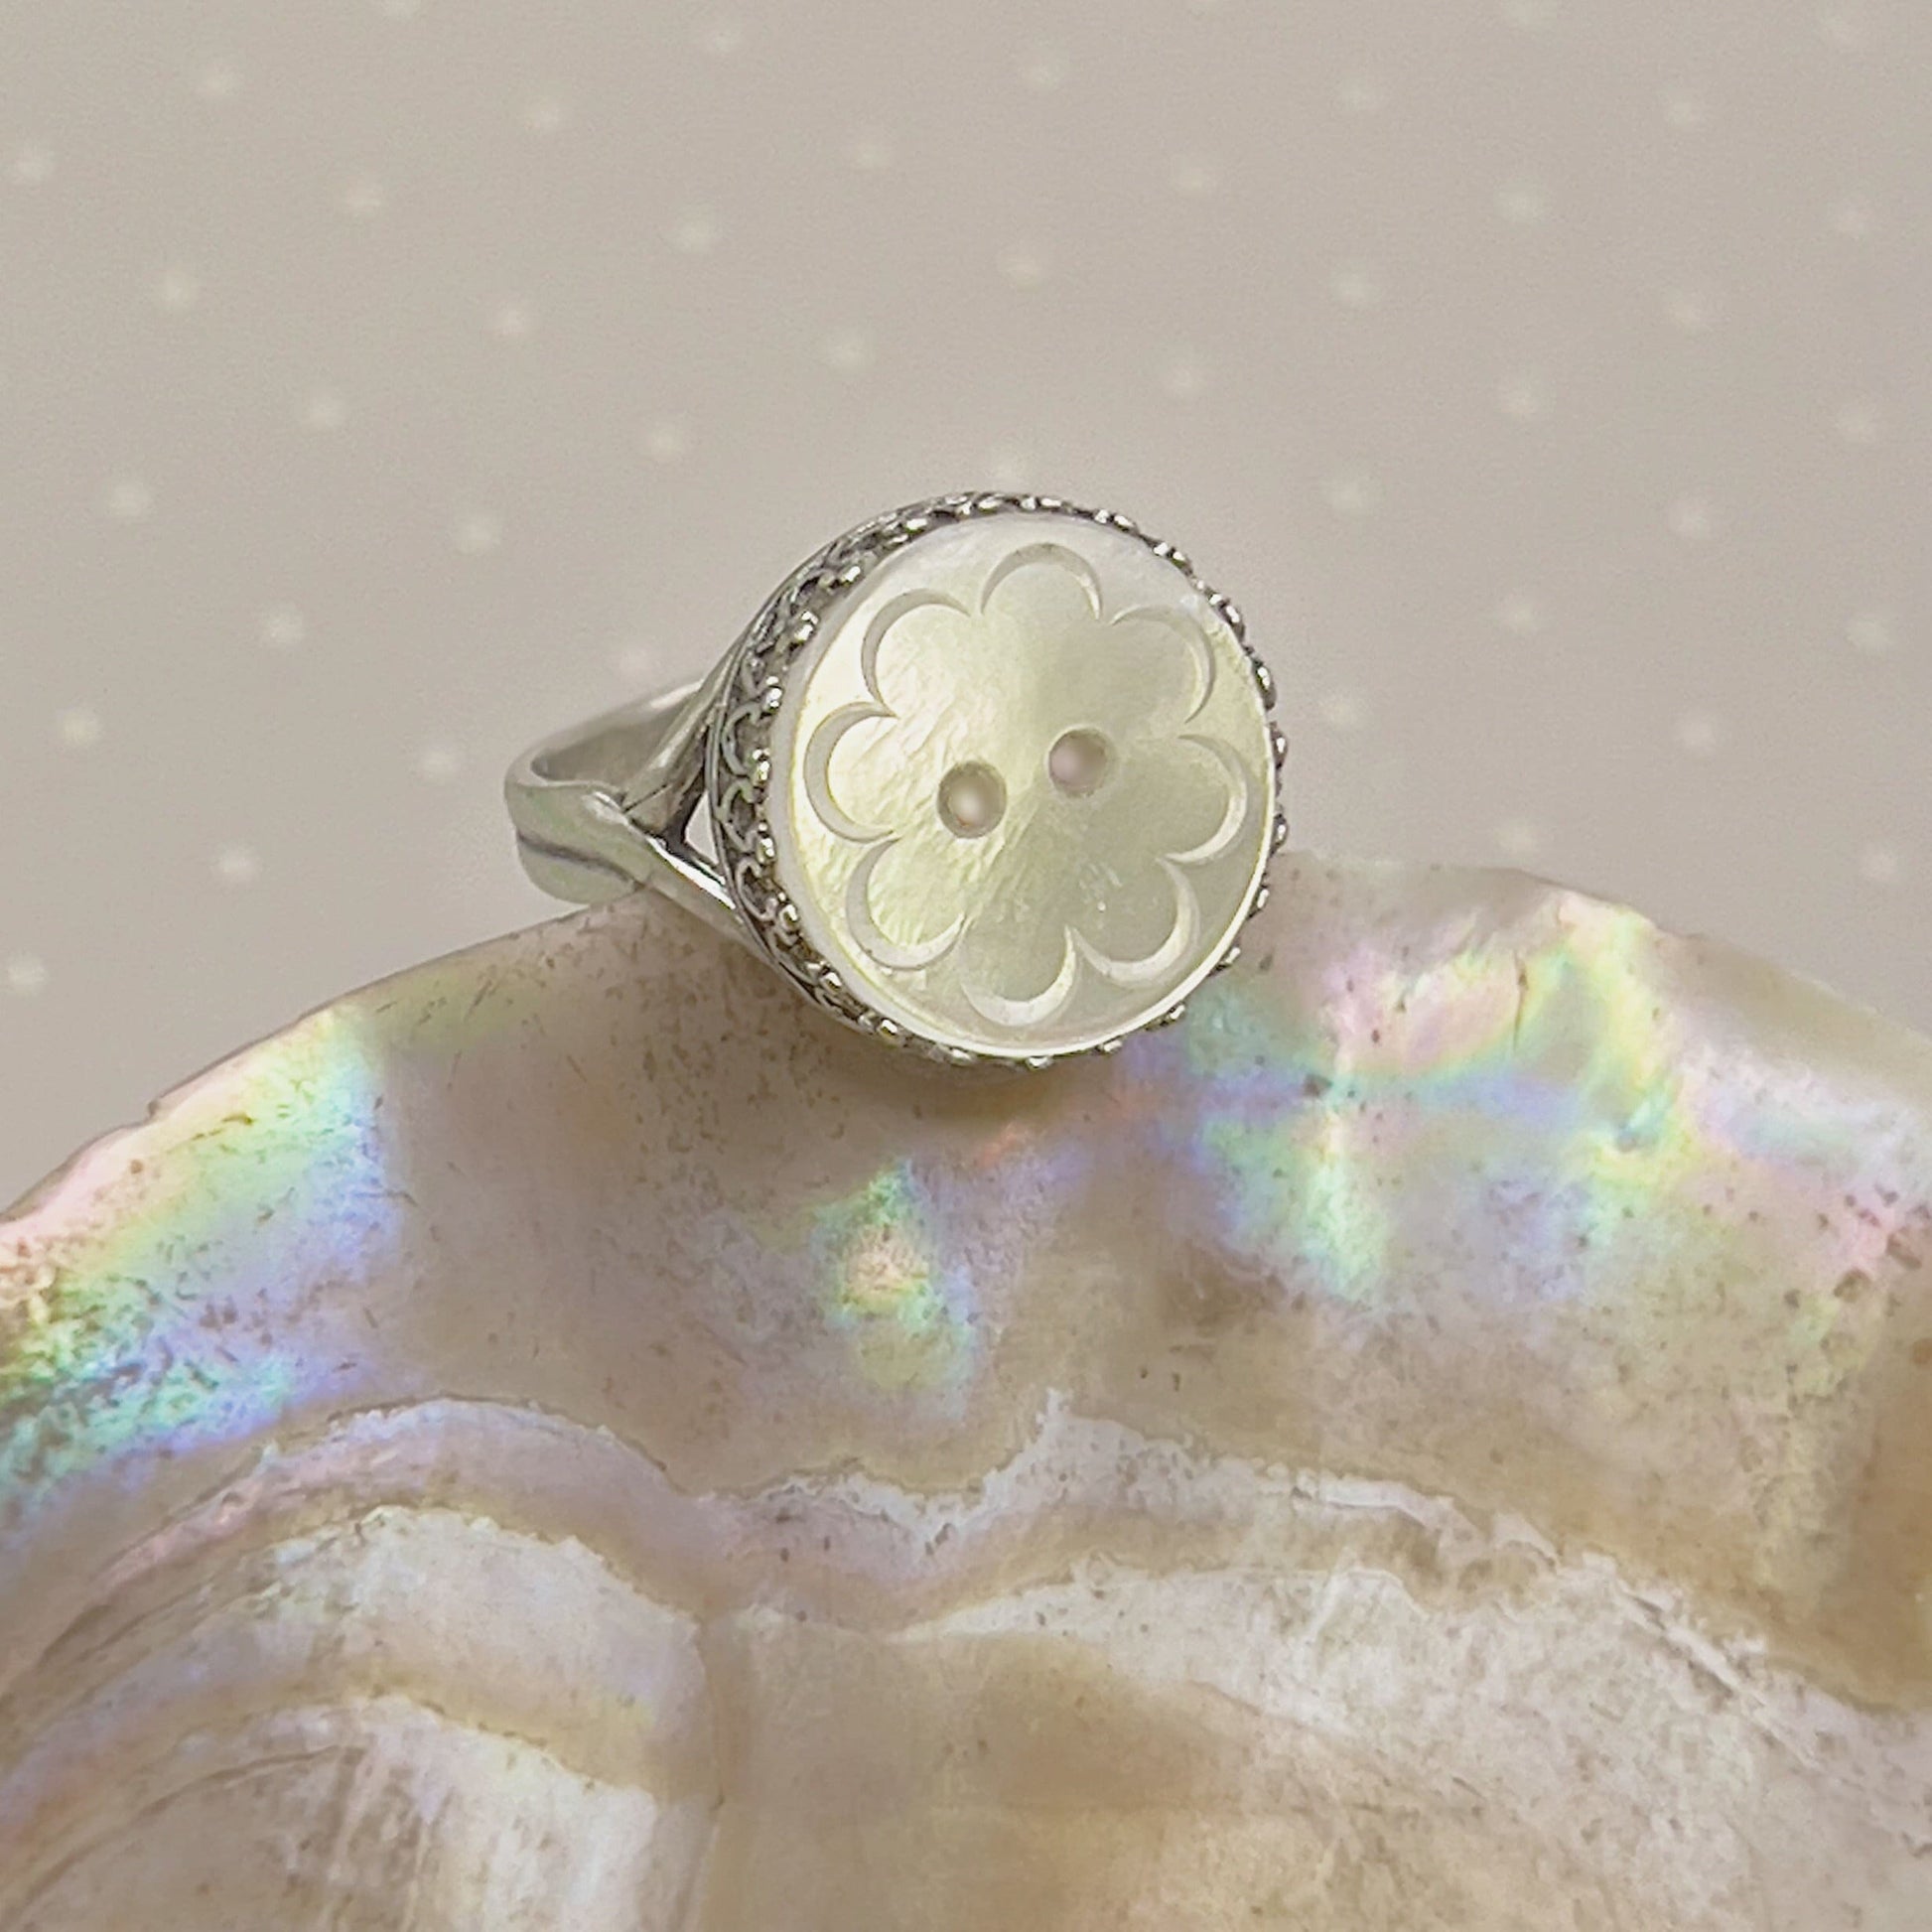 Vintage Mother of Pearl Shell Button Jewelry, Sterling Silver Adjustable Rings for Women, Unique Mom Gift